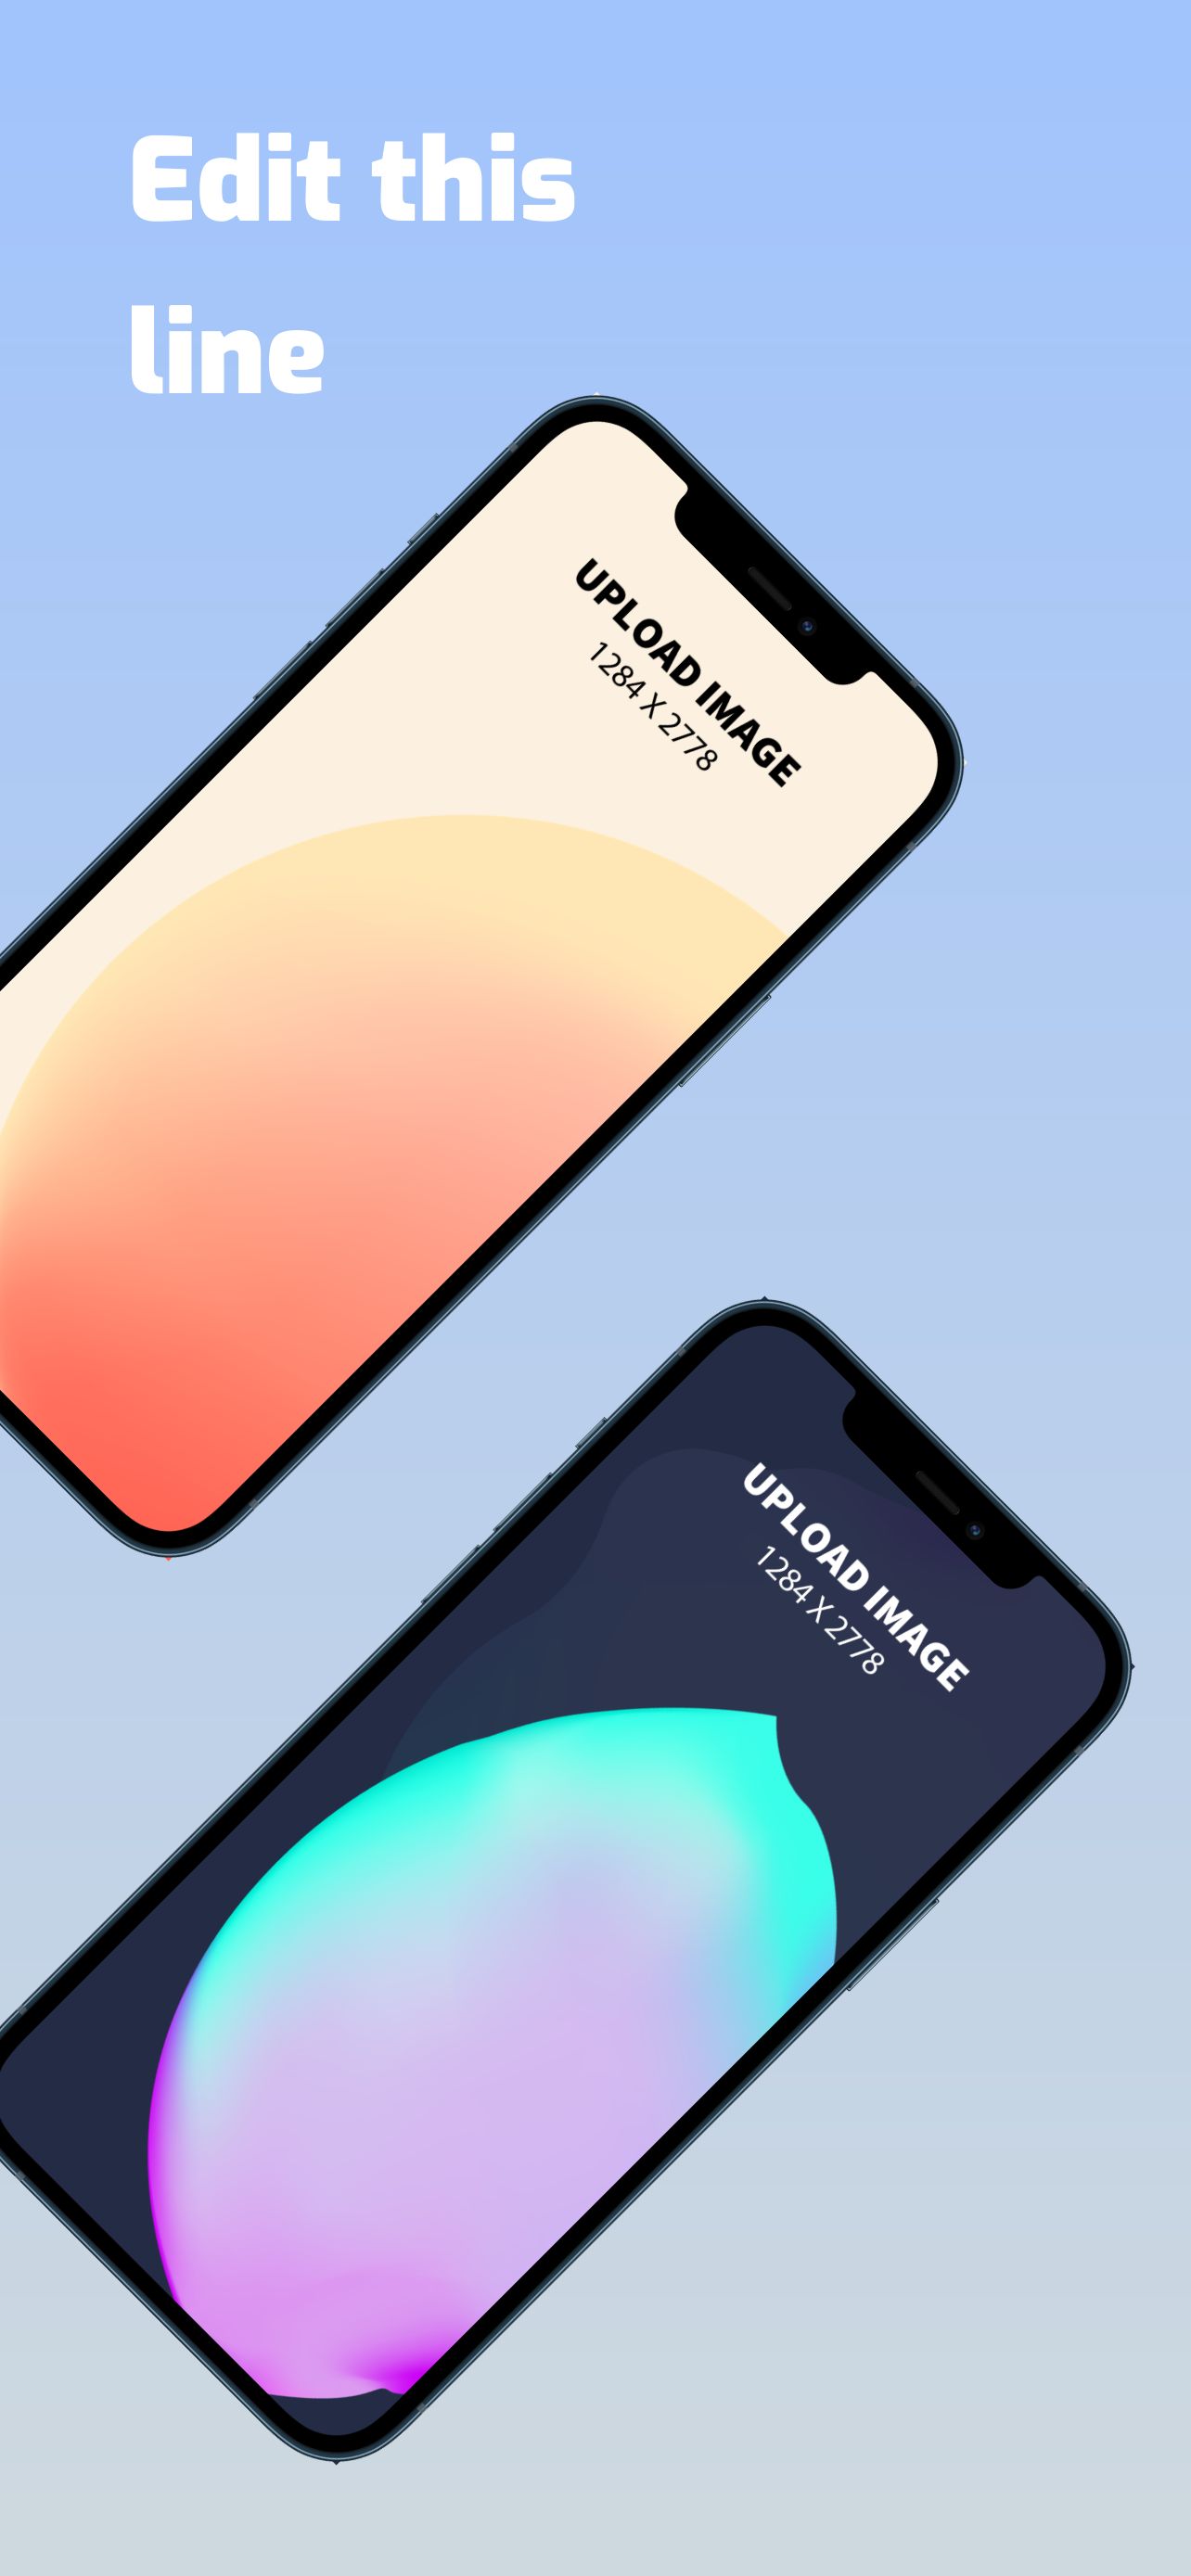 iPhone 12 Pro Max Screenshot 9 template. Quickly edit text, colors, images, and more for free.